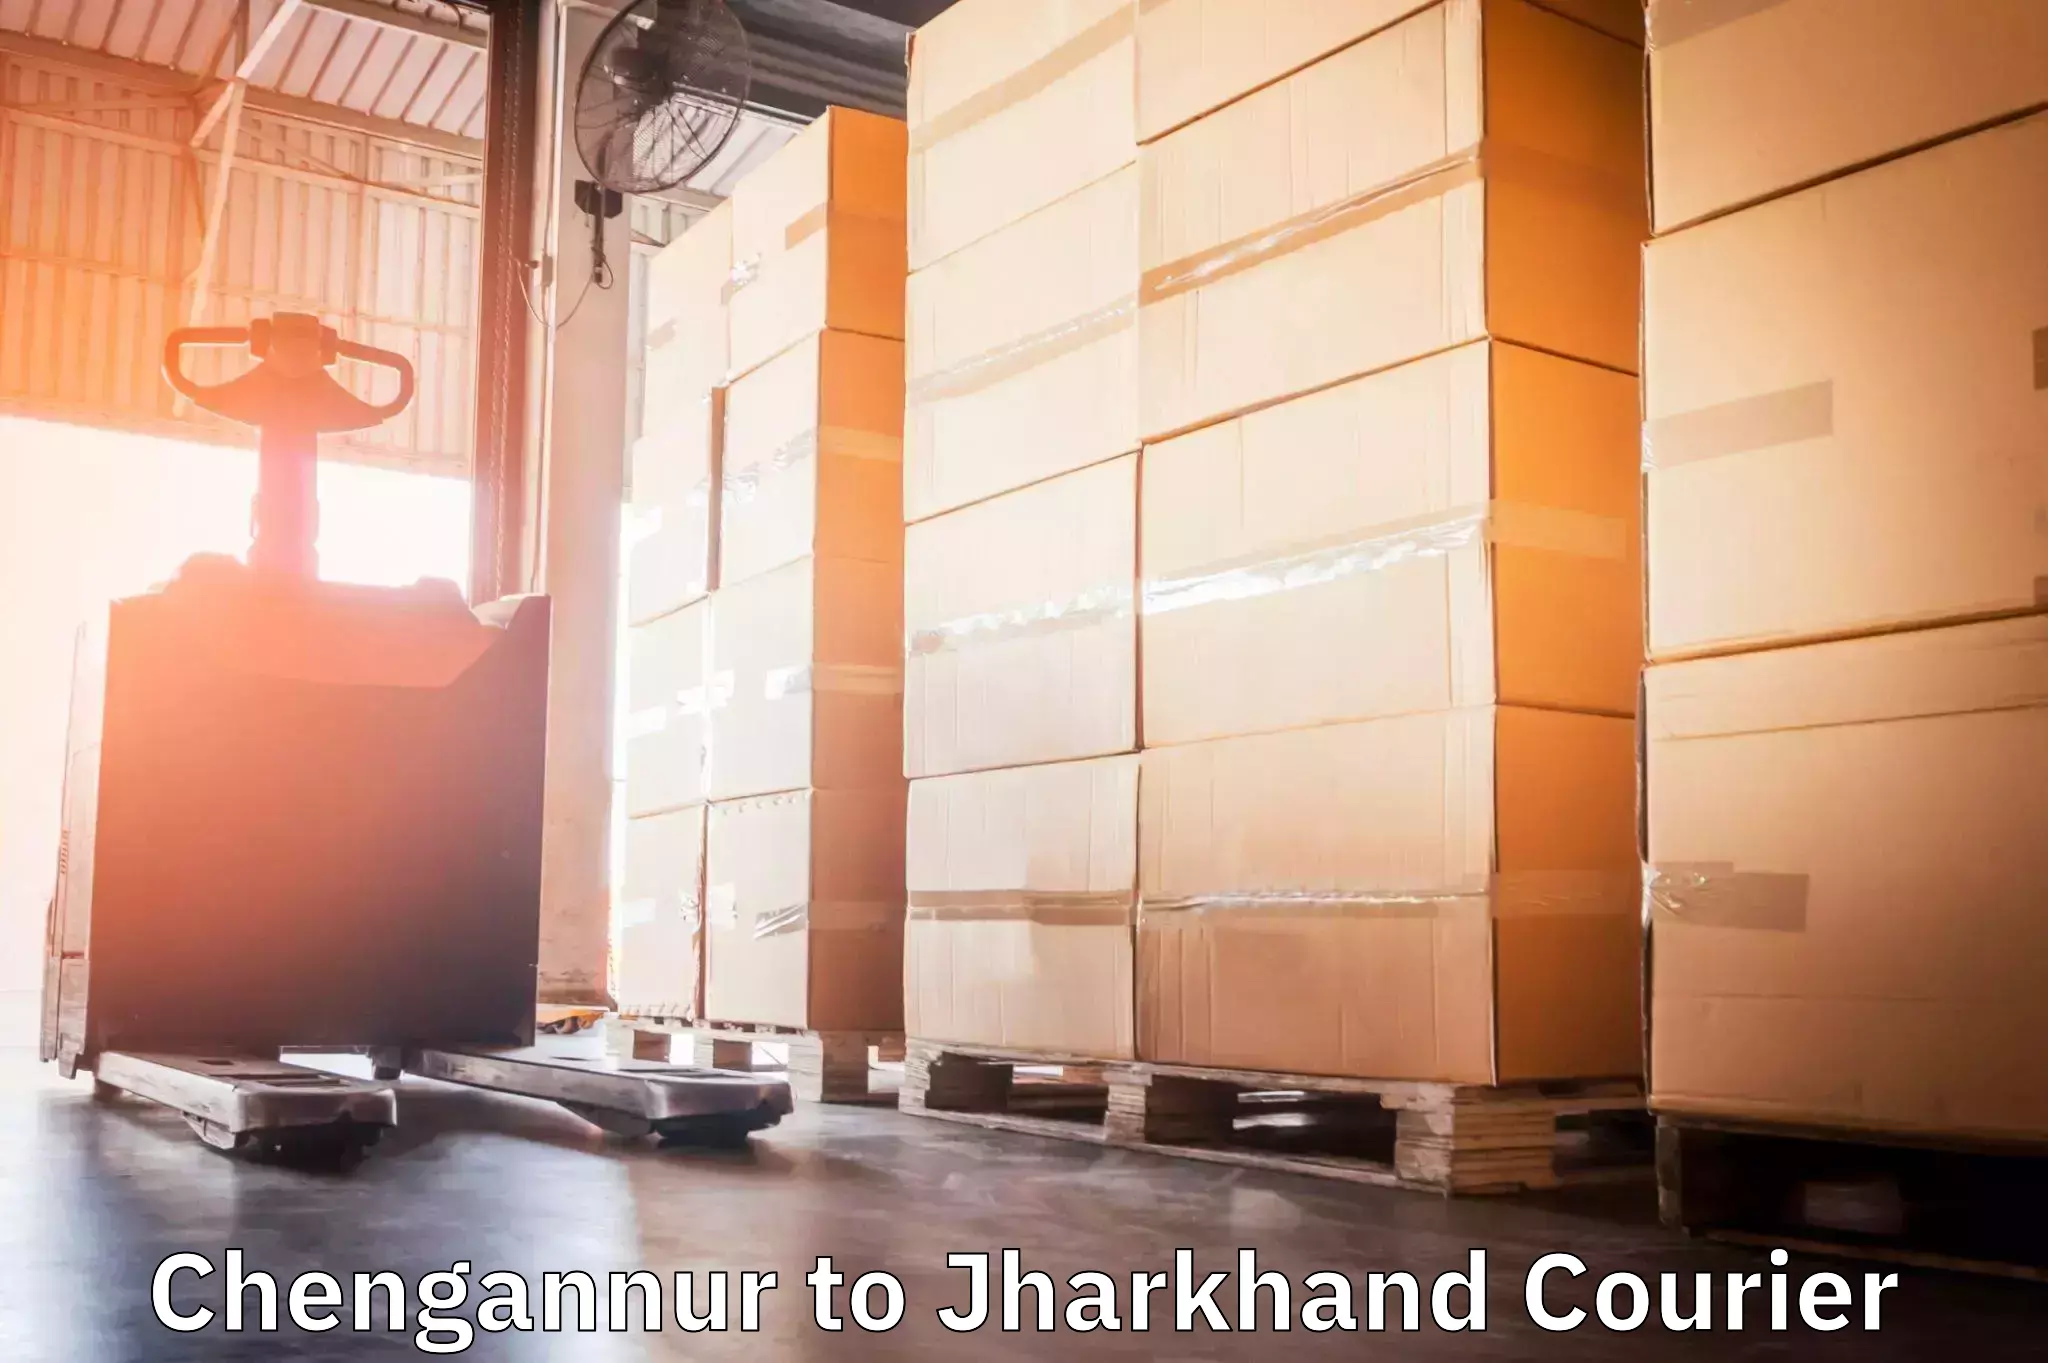 Holiday shipping services Chengannur to Jharkhand